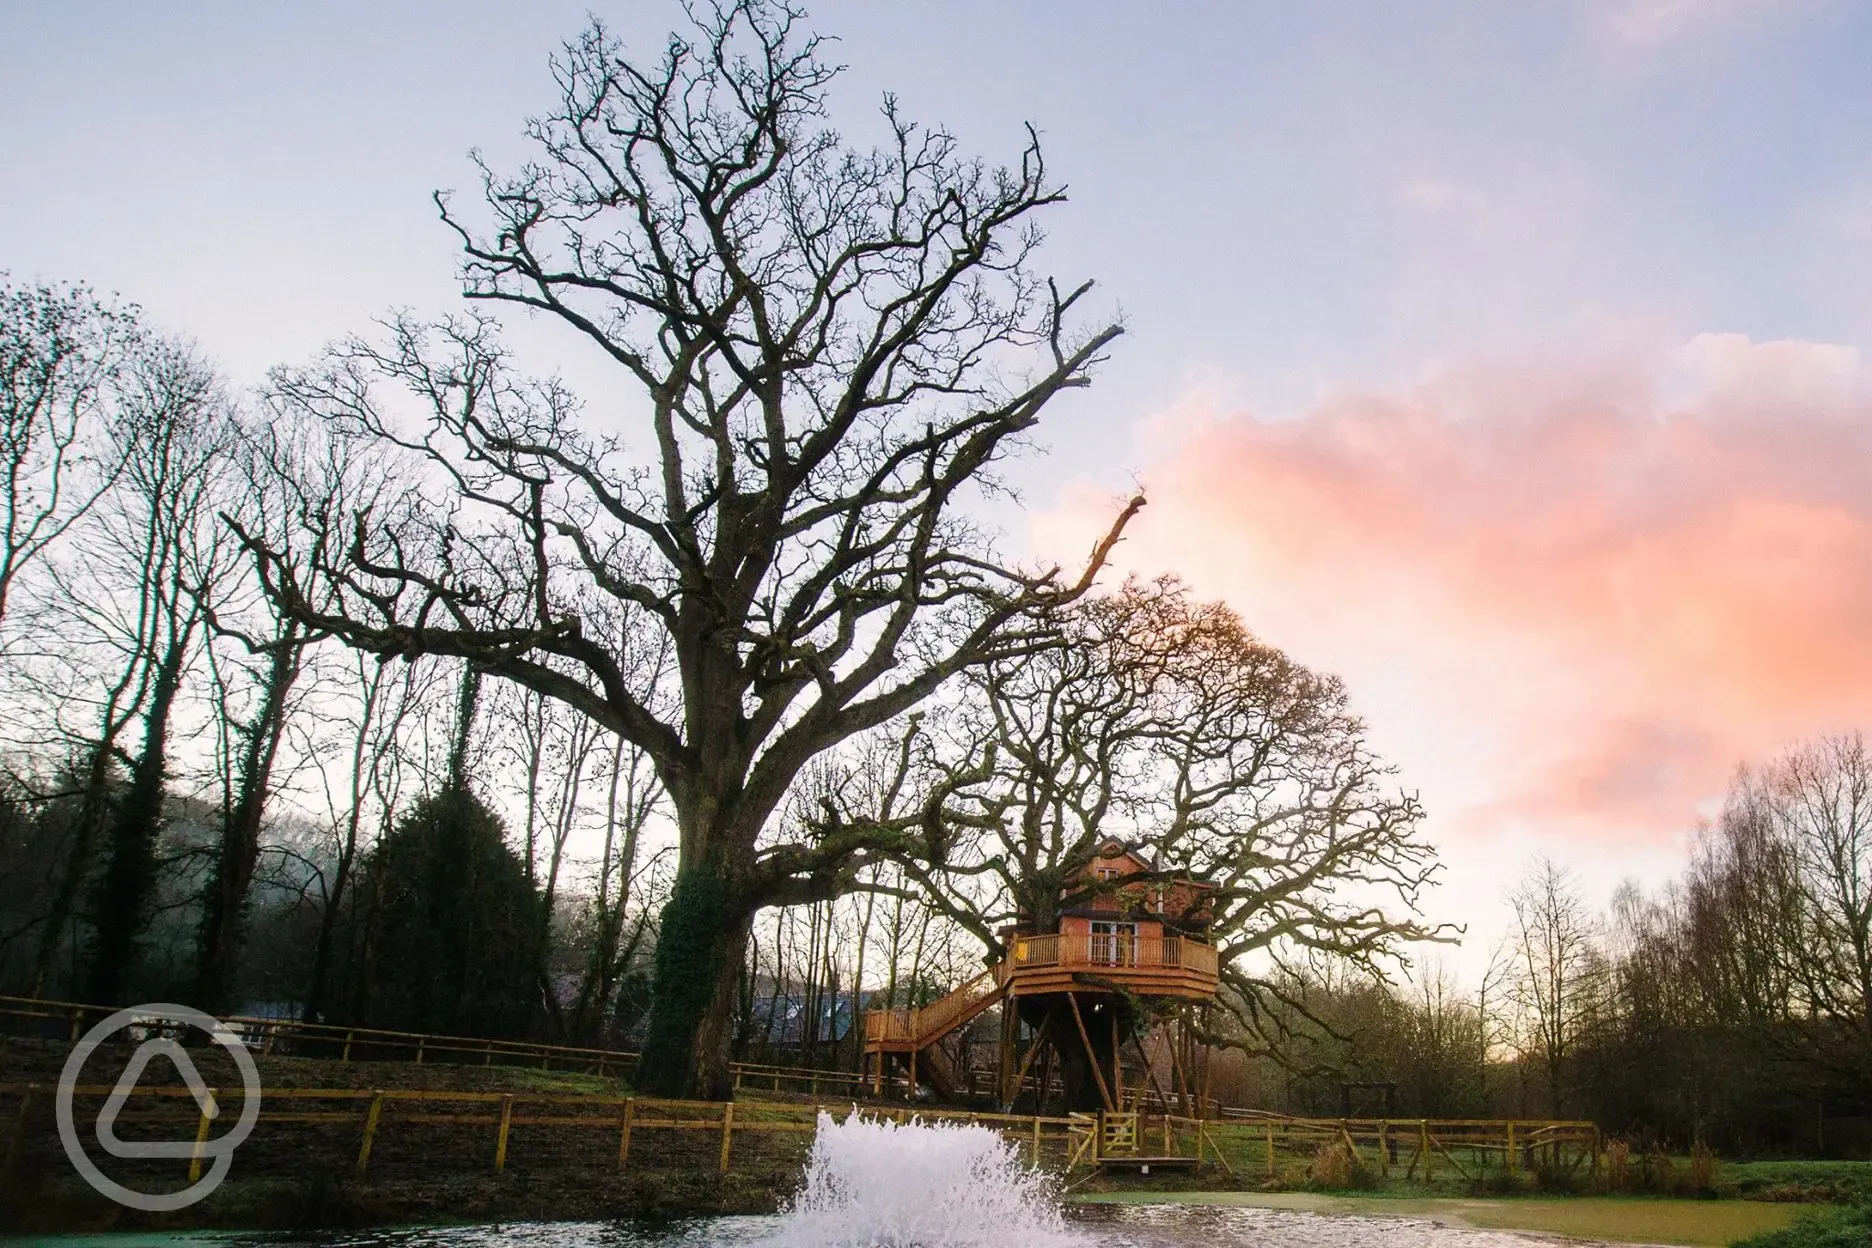 Tree house in its setting